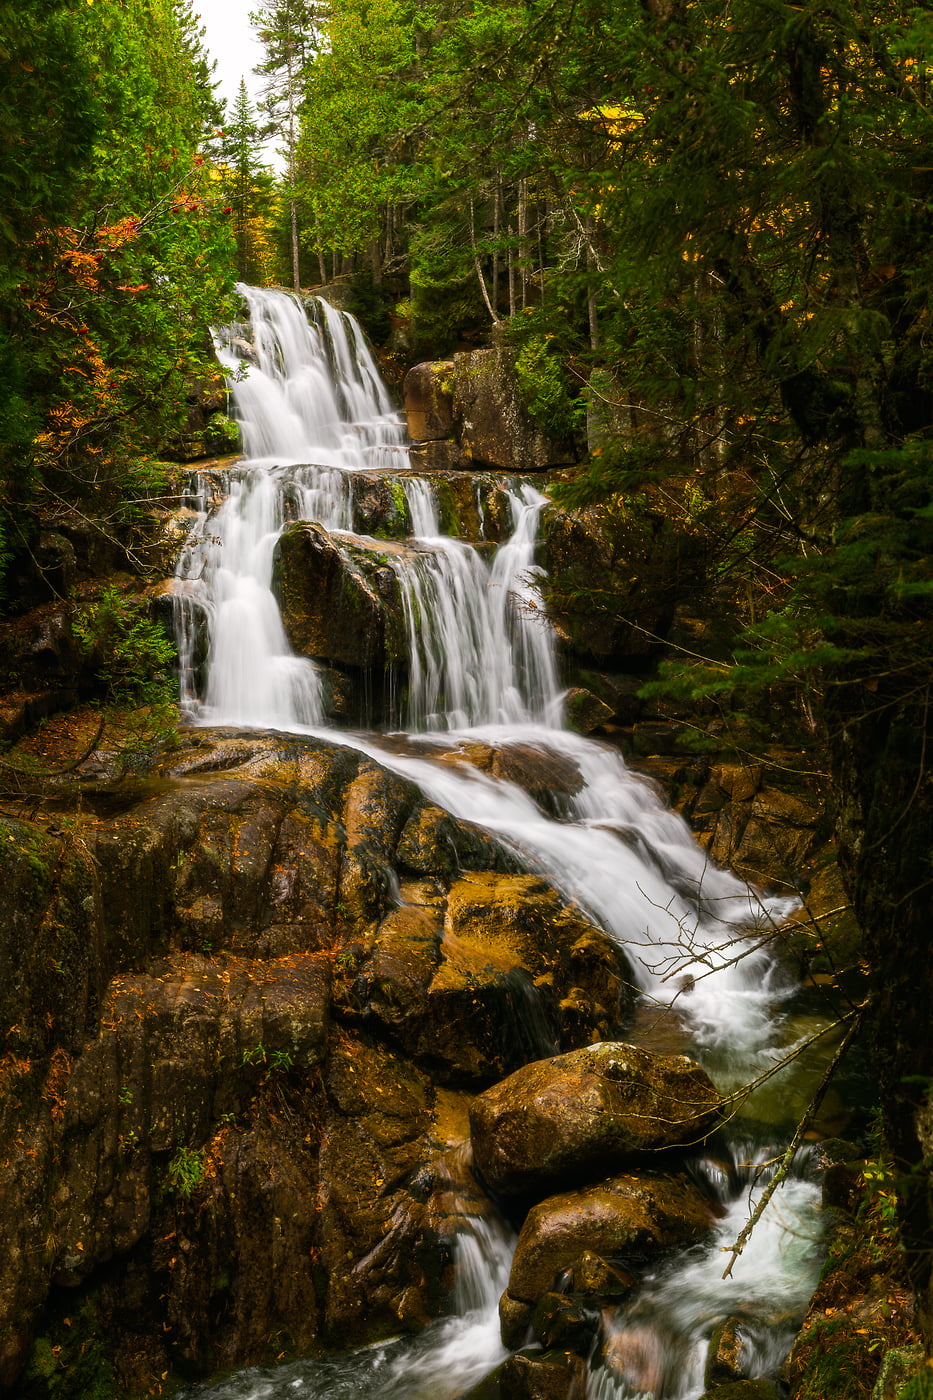 241 megapixels! A very high resolution, large-format photo of a New England waterfall with fall foliage; fine art nature photograph created by Aaron Priest at Katahdin Stream Falls on the Hunt Trail in Baxter State Park, Maine.